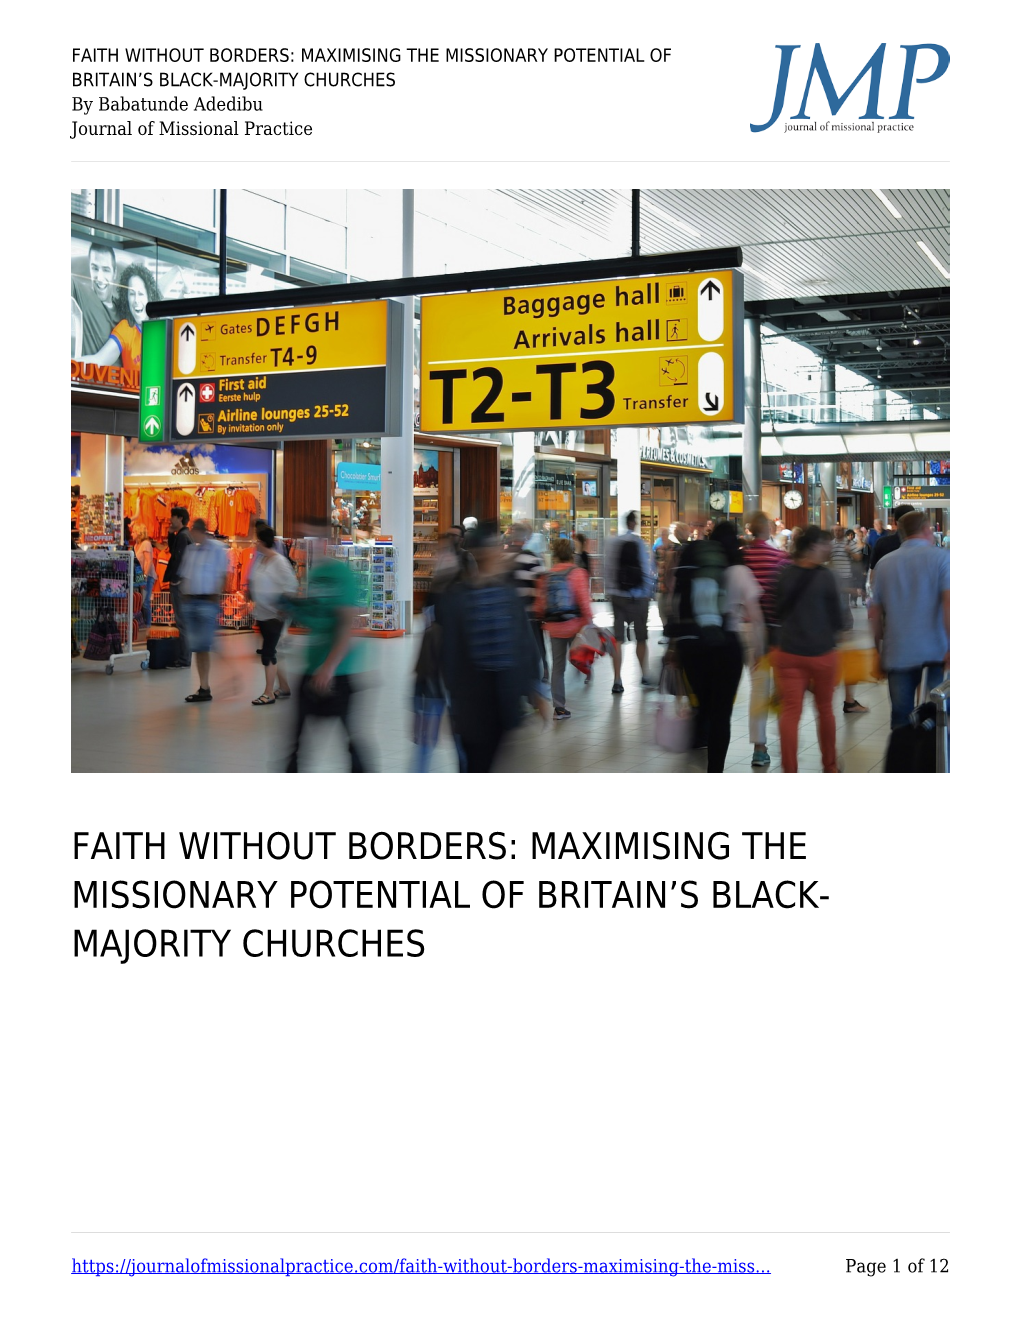 Maximising the Missionary Potential of Britain's Black-Majority Churches